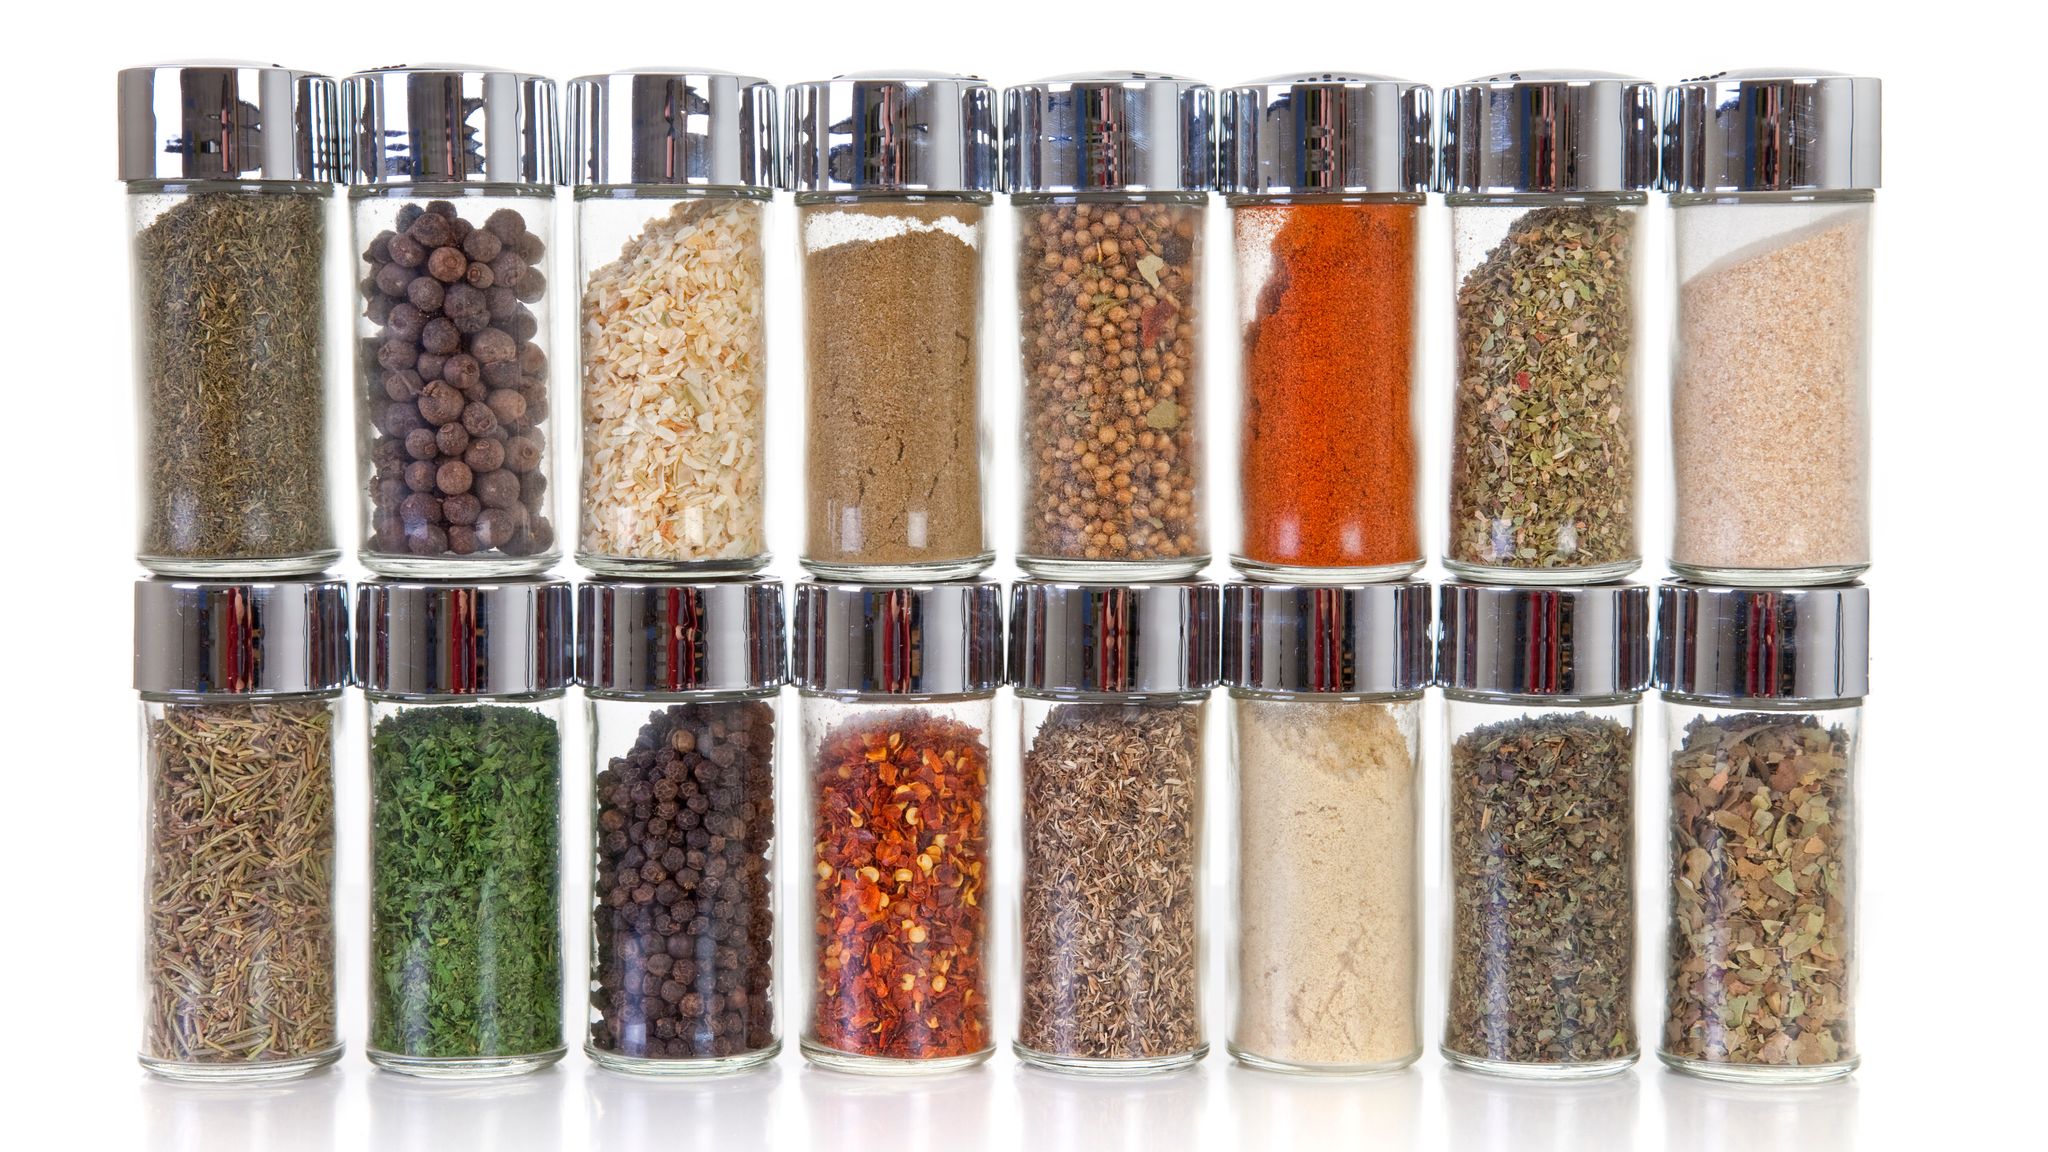 Spice Containers an Important Point of Cross-Contamination in the Kitchen